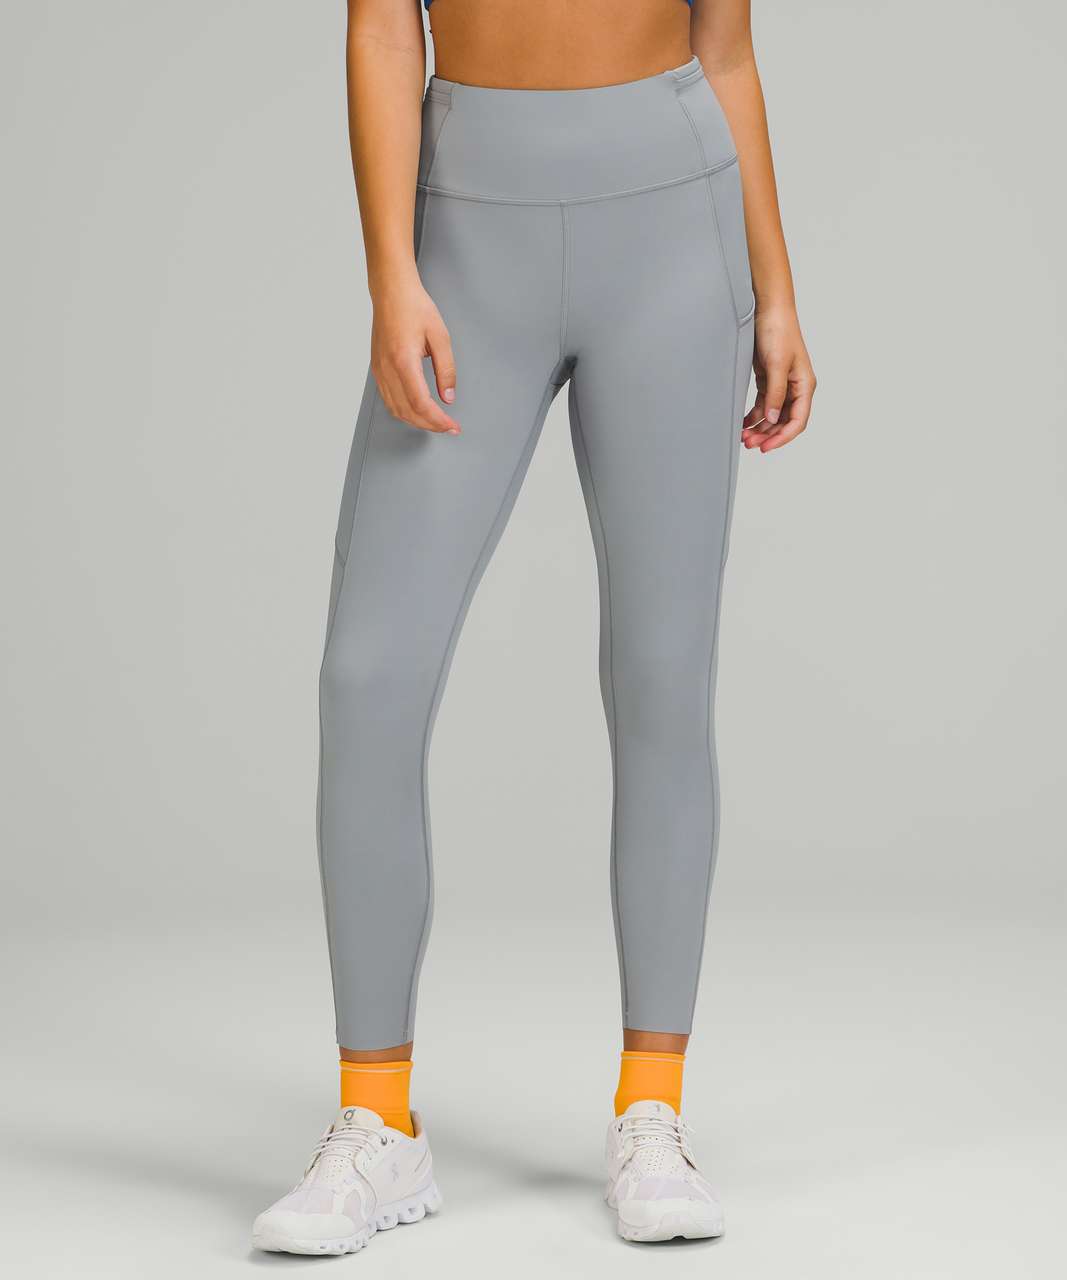 Lululemon Fast and Free High-Rise Tight 25" *Nulux - Rhino Grey